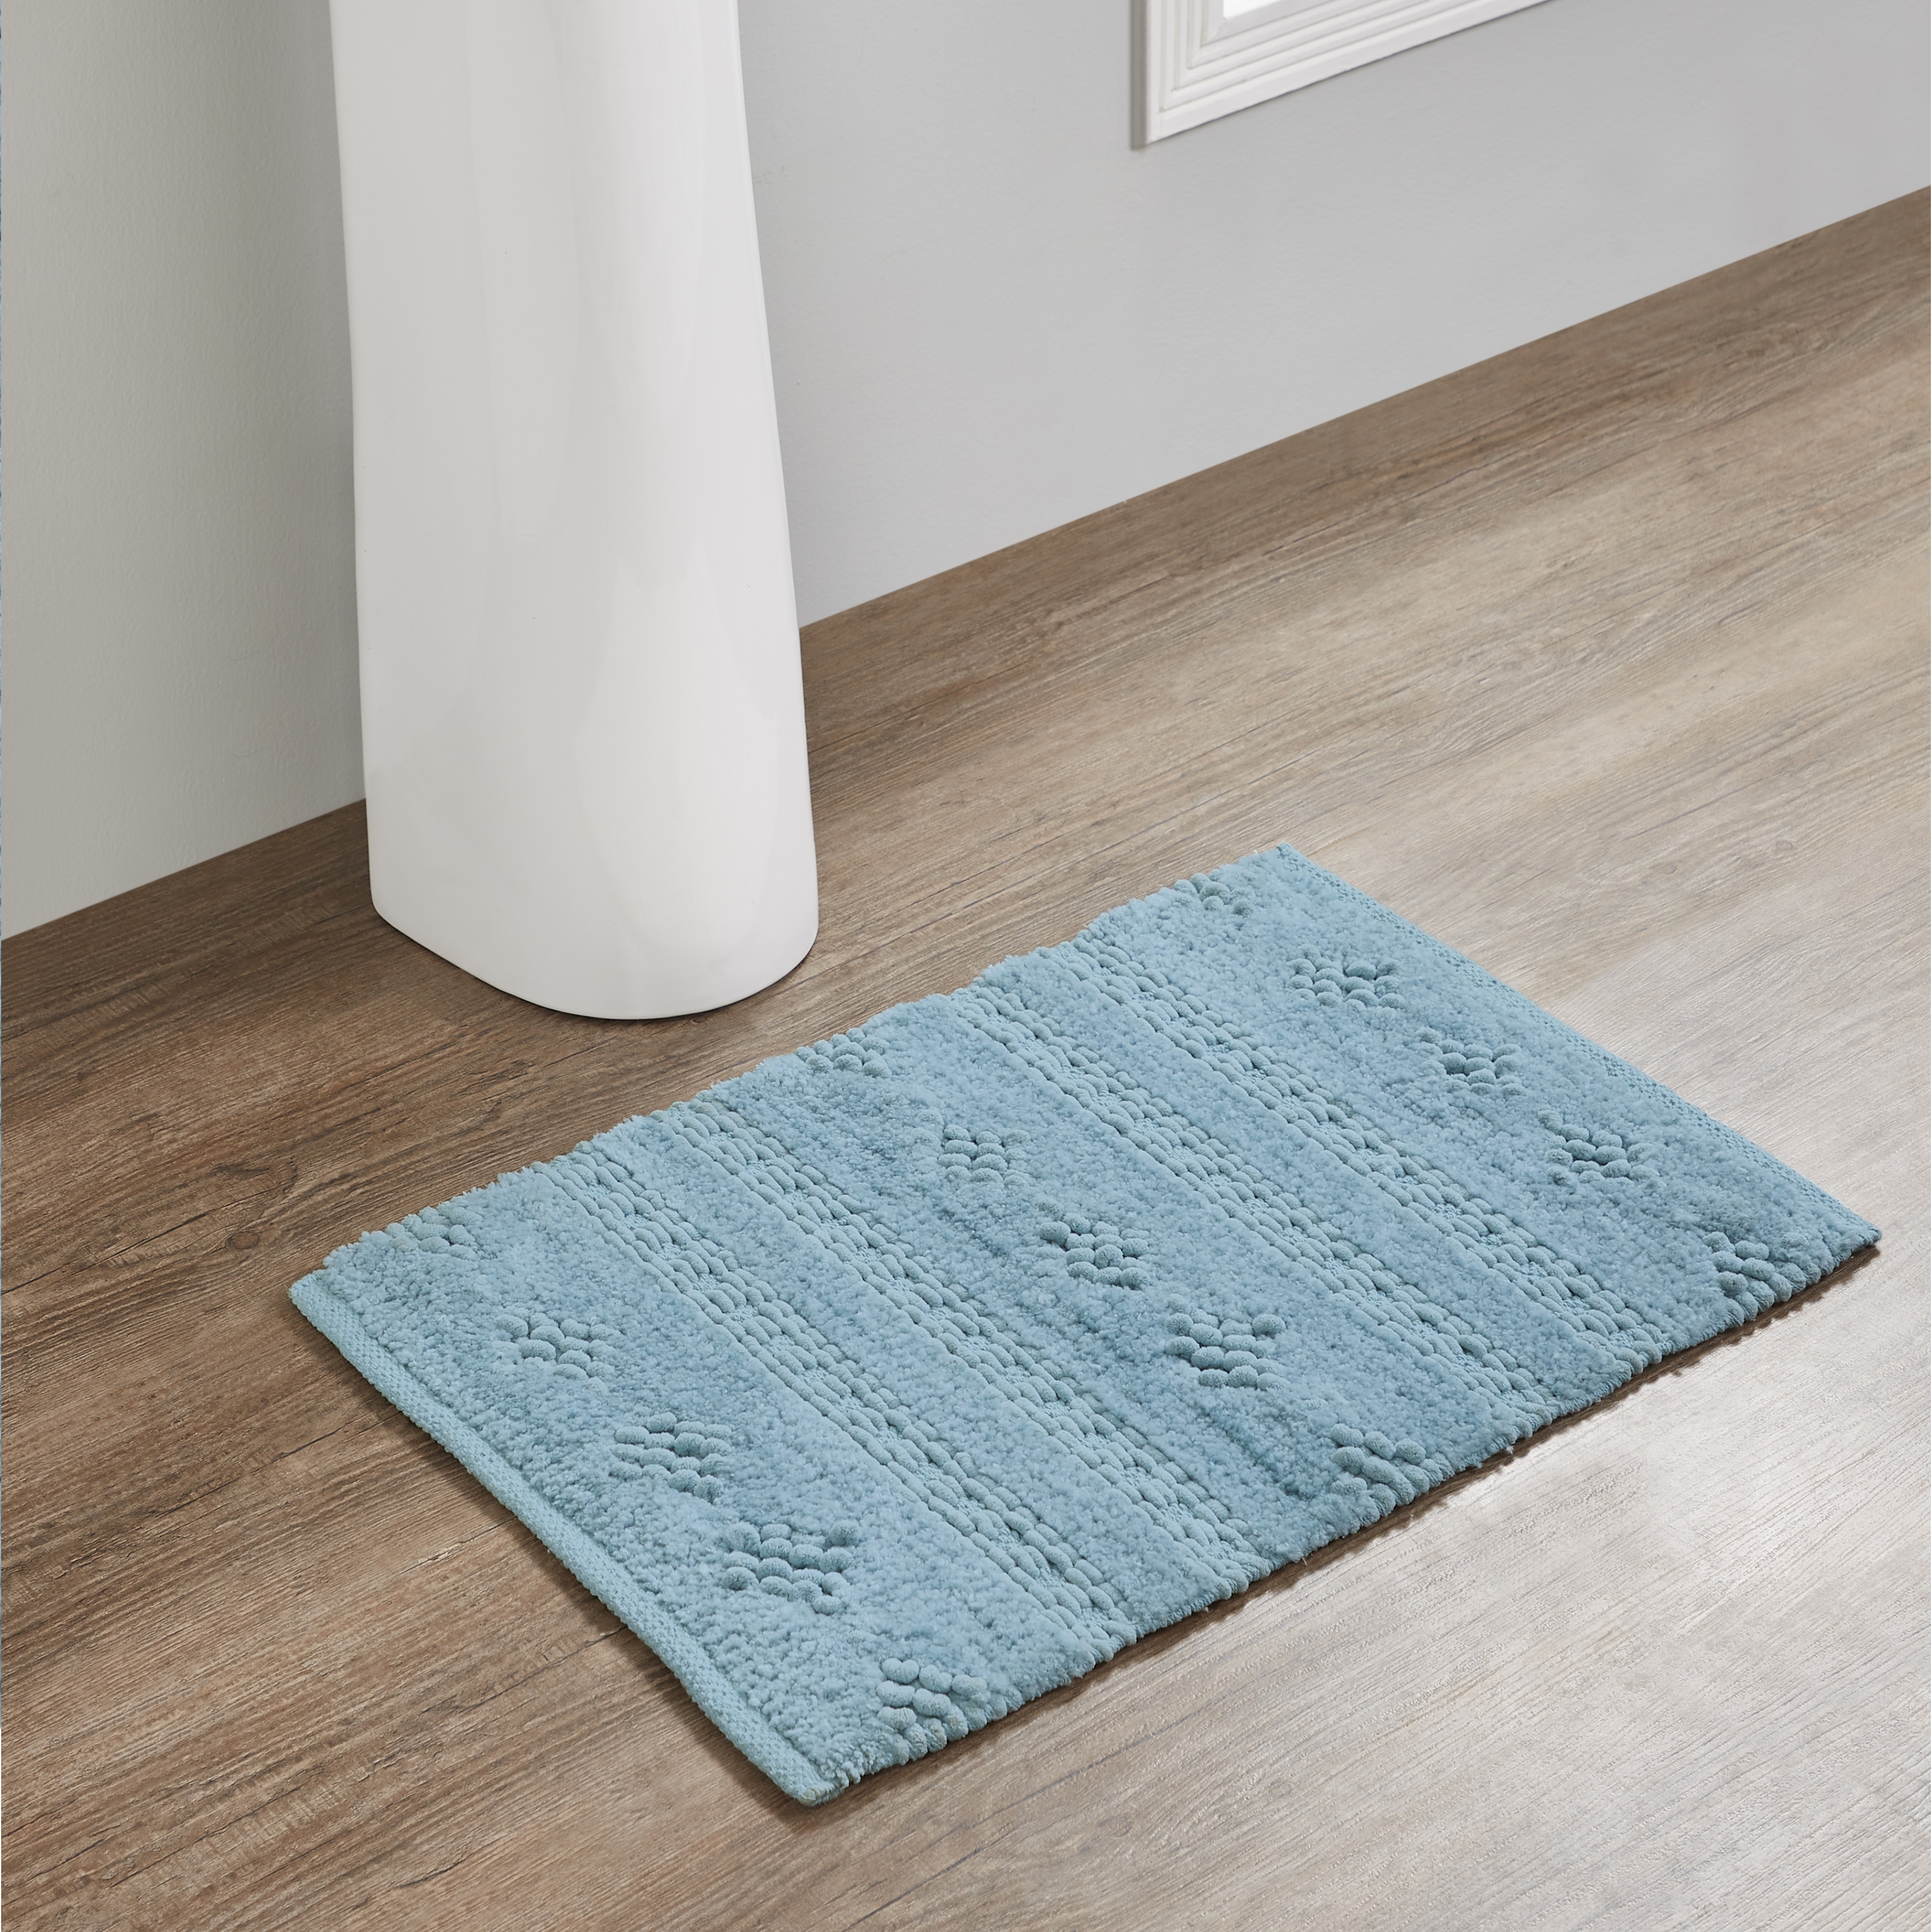 https://ak1.ostkcdn.com/images/products/is/images/direct/e1c004c0a097224f3a0d478522d1ec8fa4f2e5bb/Tahari-Home-Meera-Micro-Chenille-Bath-Rug%2C-Blue-haze.jpg